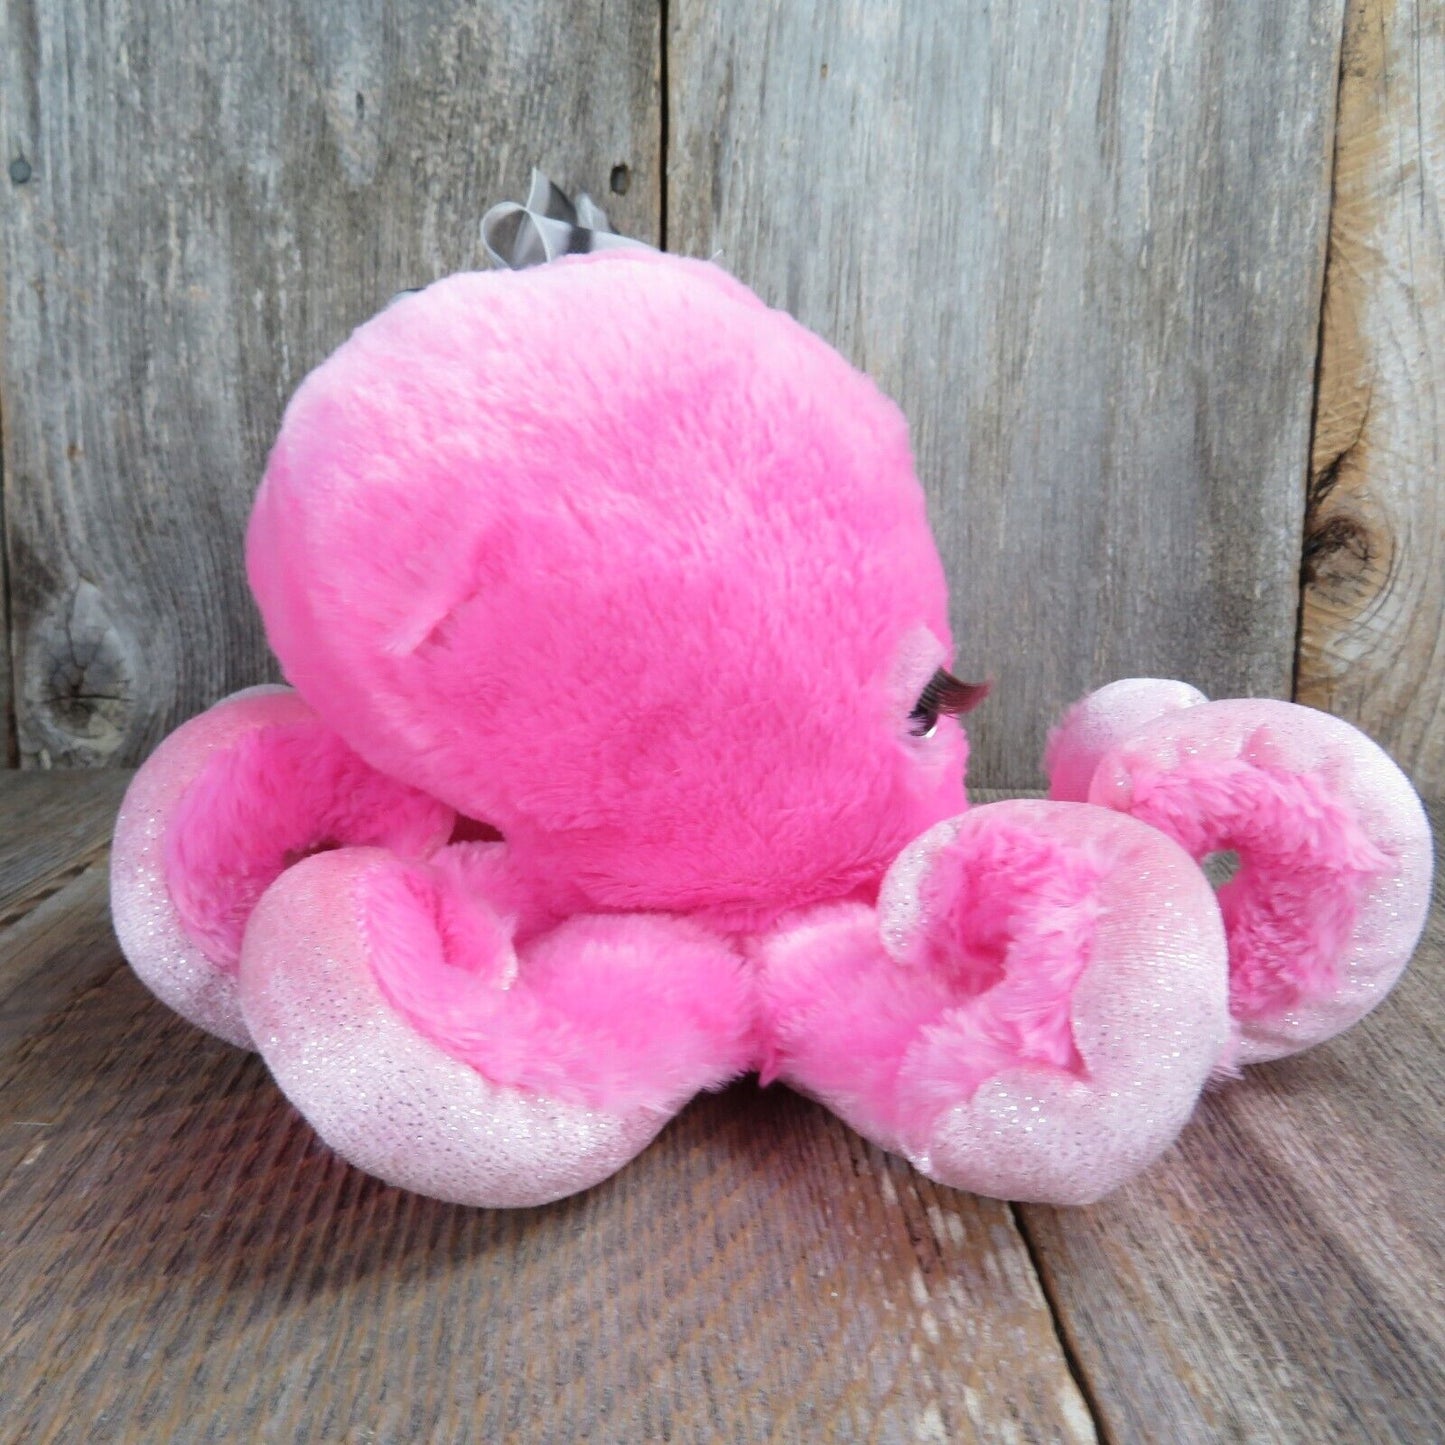 Pink Octopus Plush Eye Lashes Bow The Petting Zoo Sparkles Stuffed Animal 2018